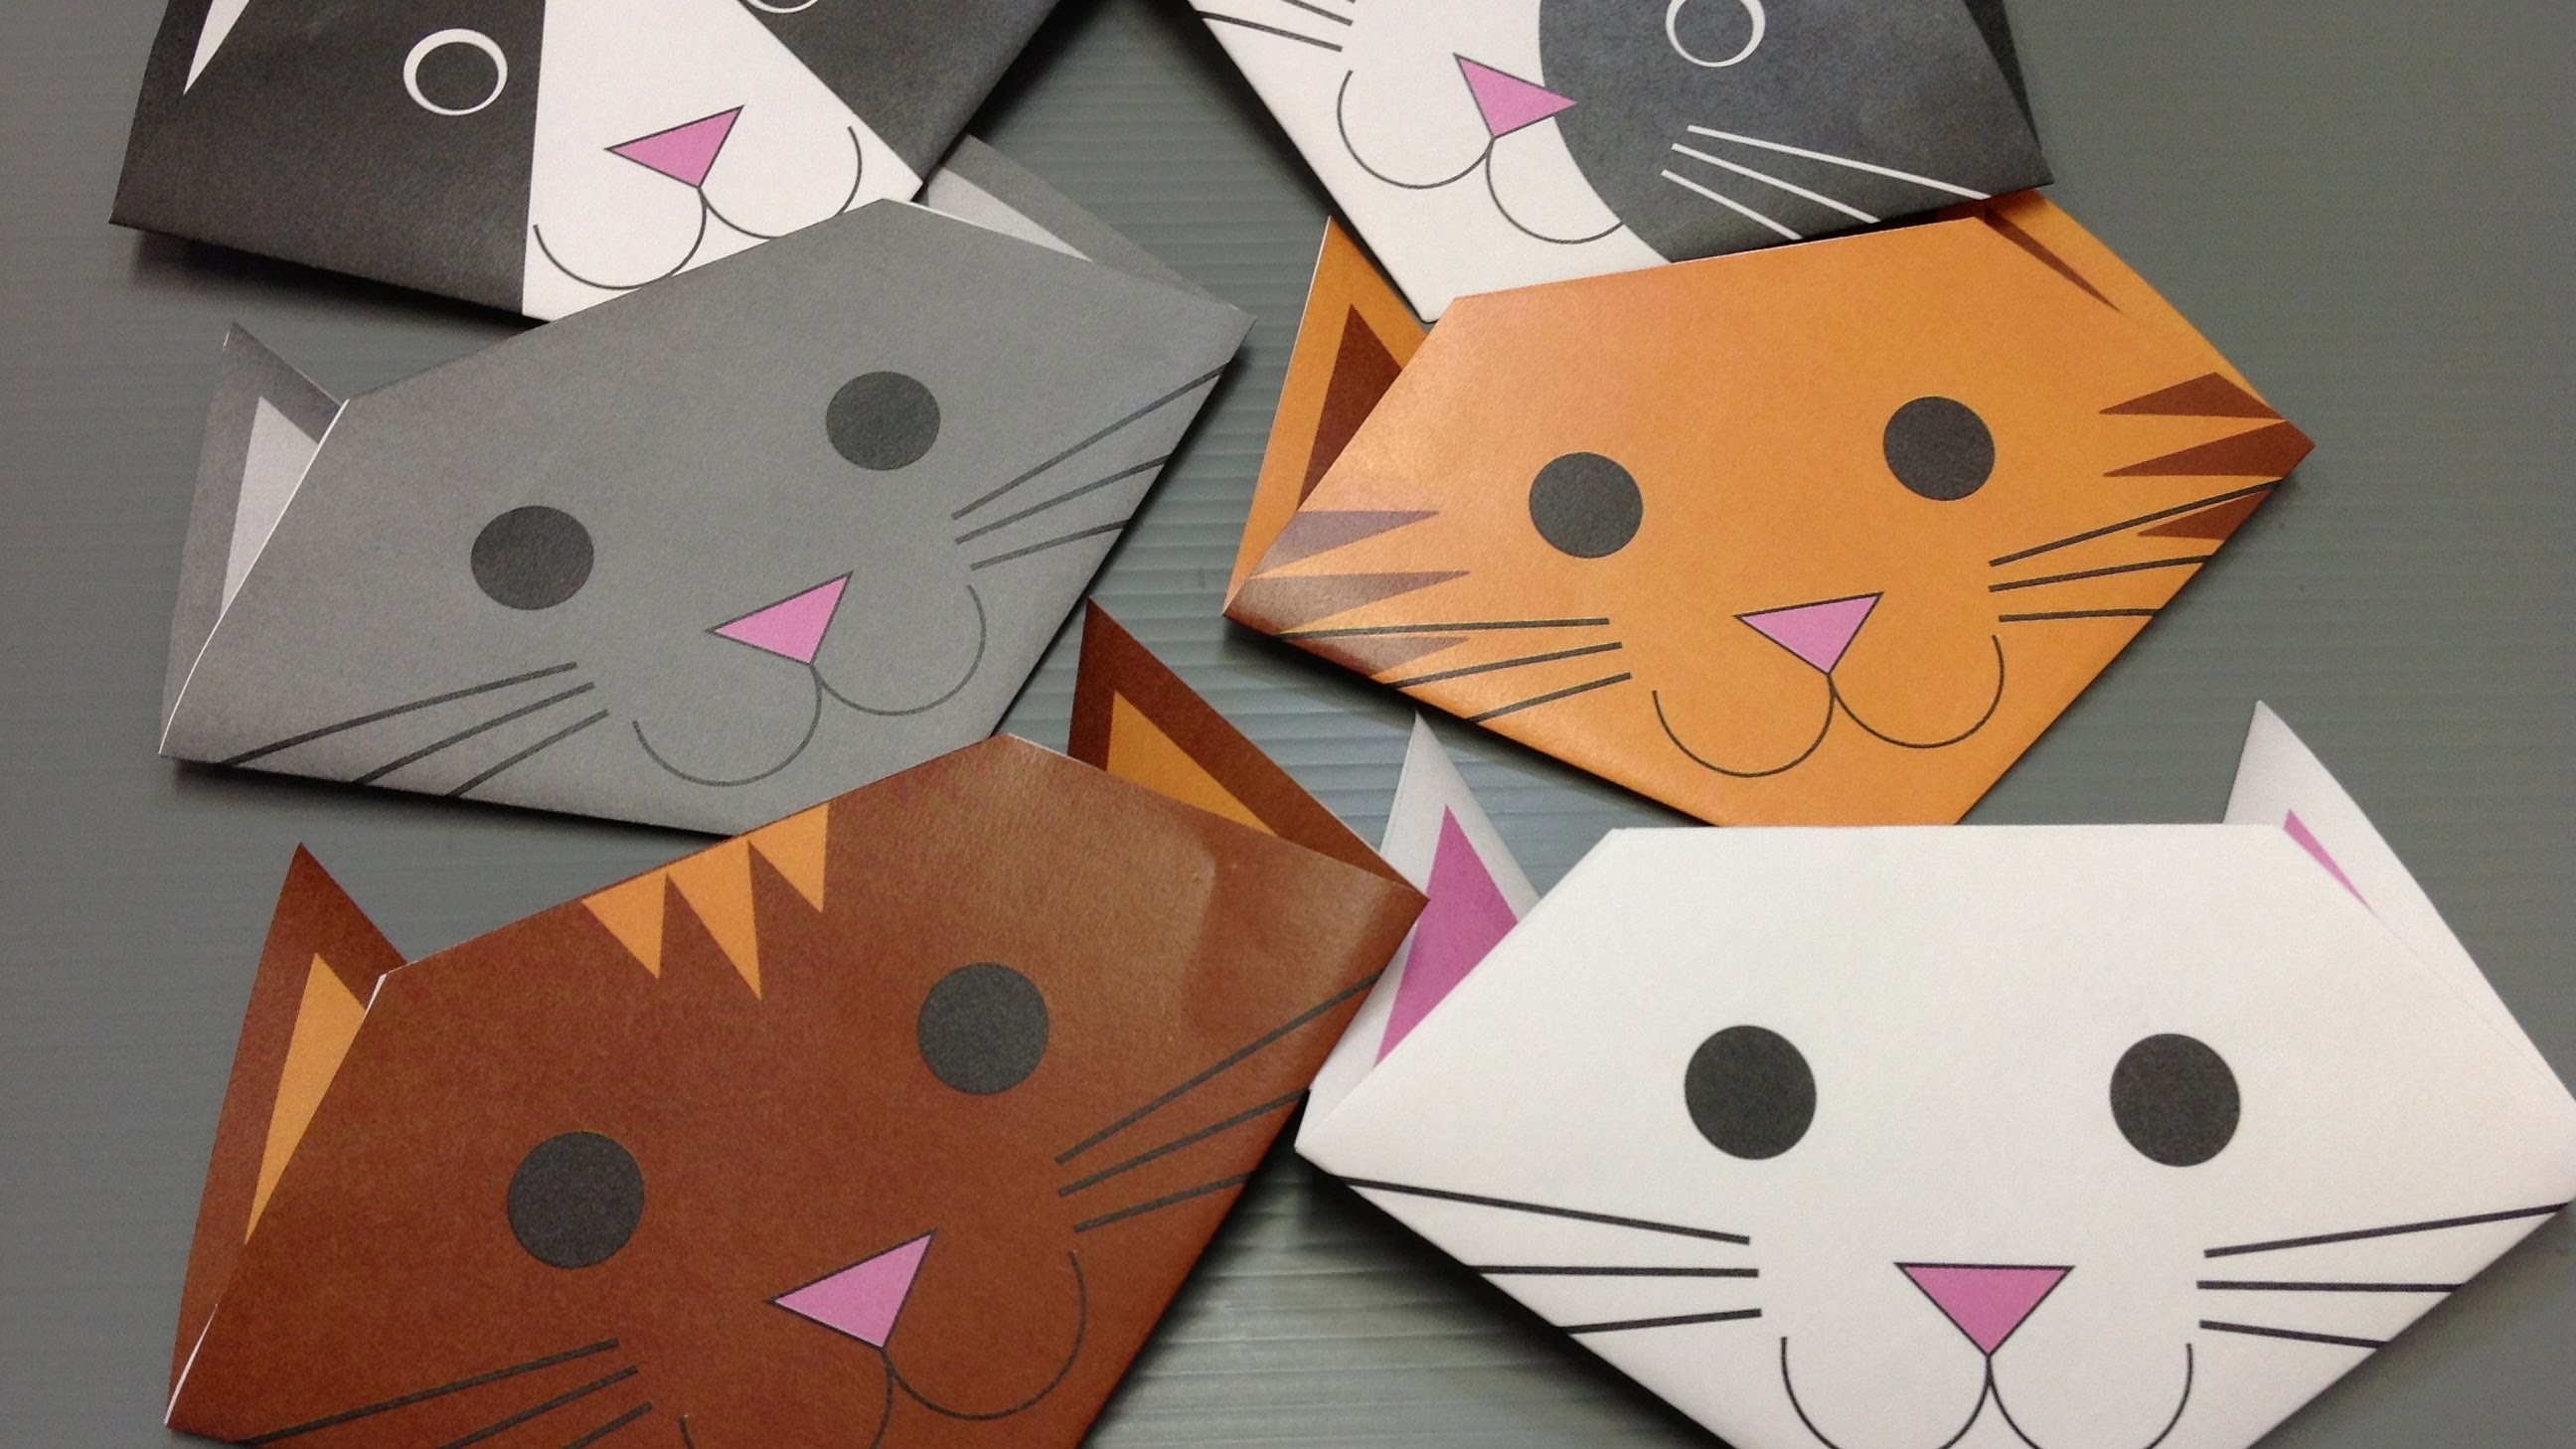 Free Origami Cat Paper - Print Your Own! - Cute Cats - YouTube